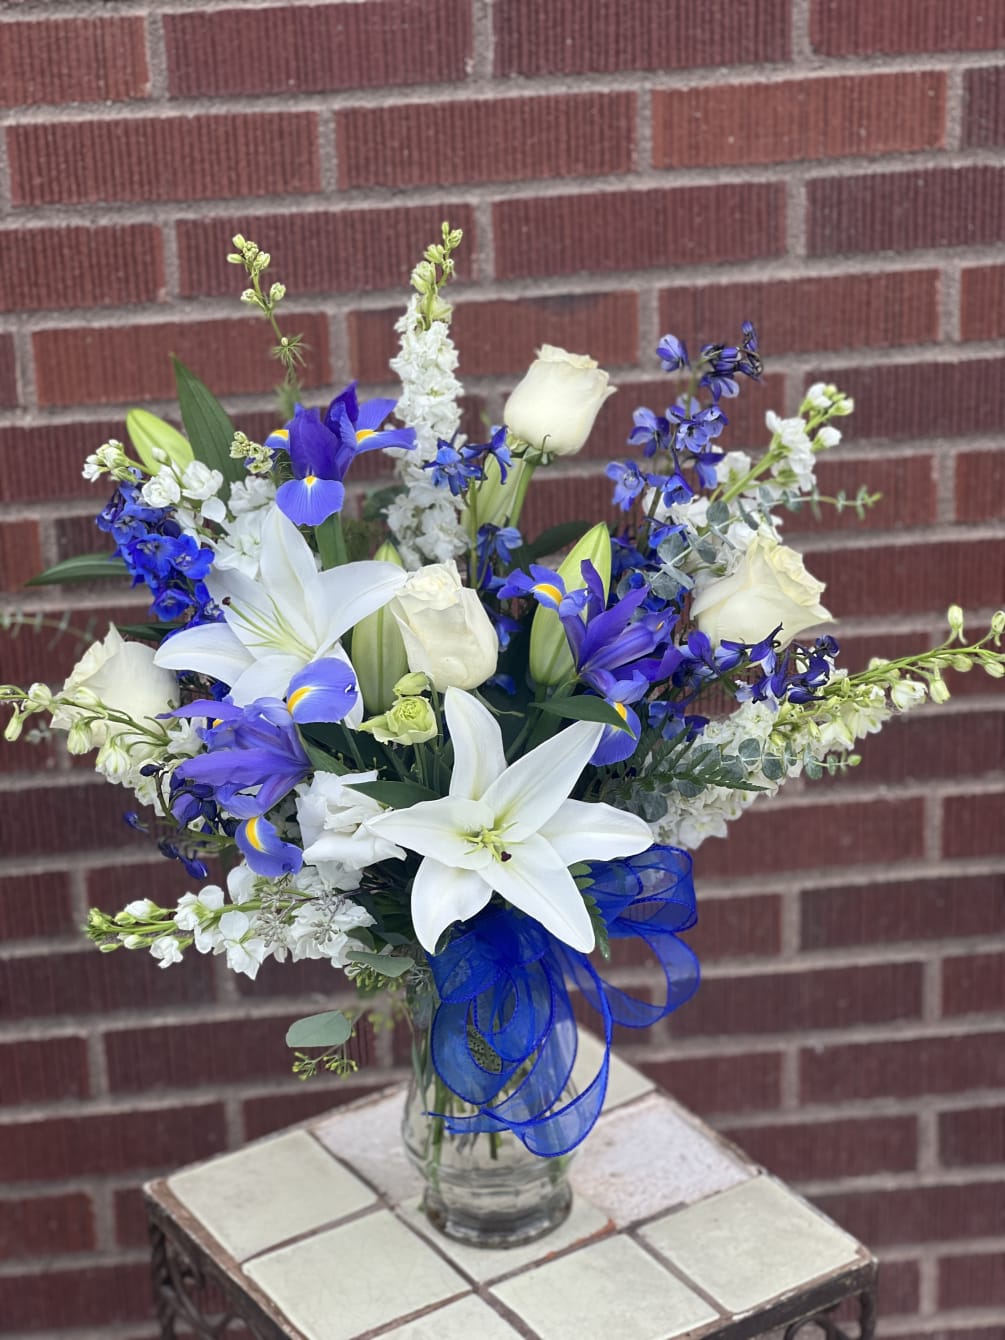 Featuring lilies, roses, stock, iris and larkspur. 